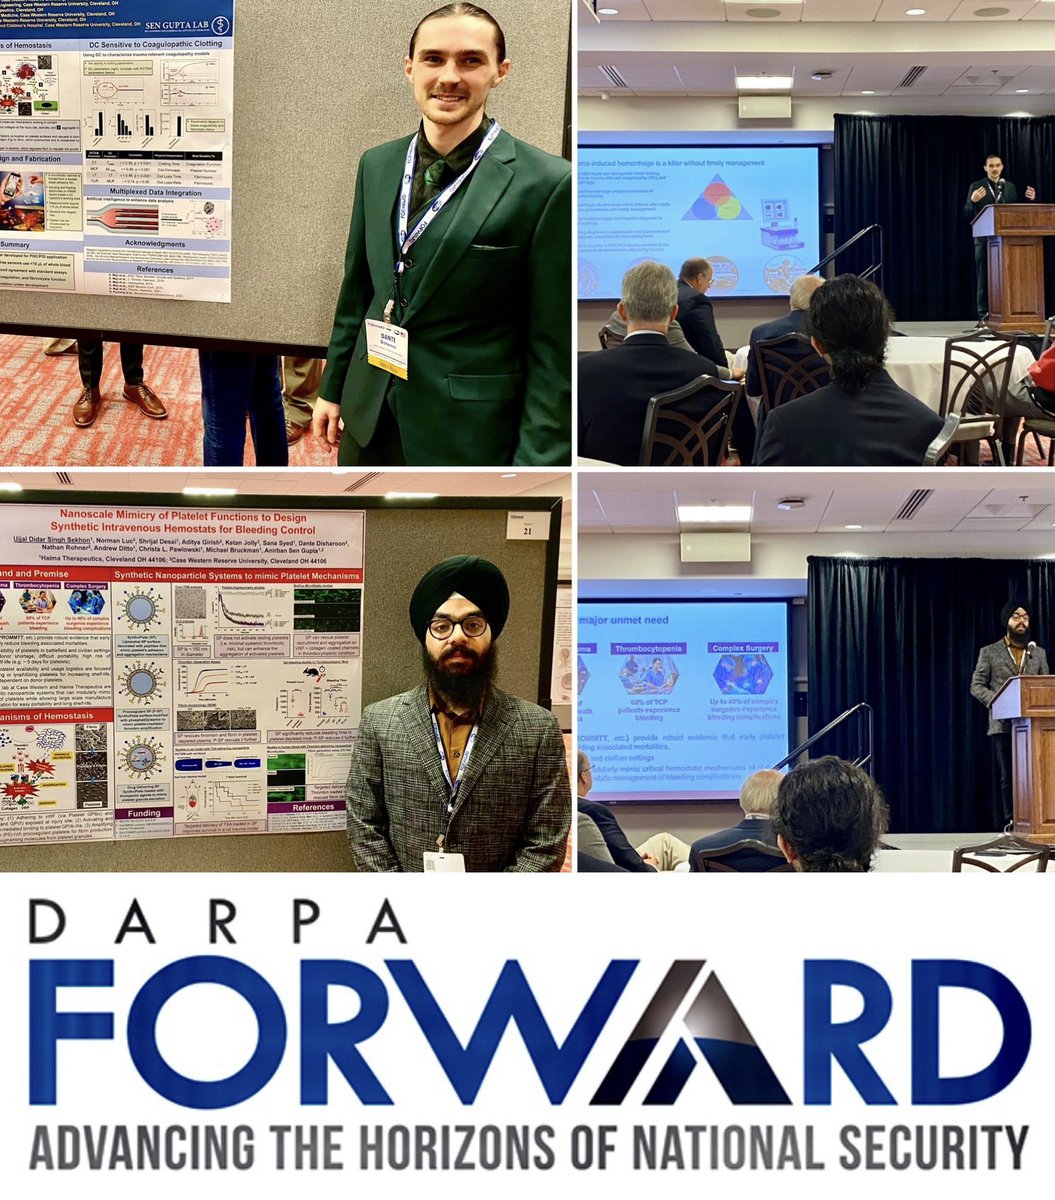 Congratulations to @UjjalDidarSingh from @HaimaThr & #DanteDisharoon from @CWRUBME @CaseEngineer @Sen_Gupta_Lab for being selected to present at @DARPA FORWARD symposium @OhioState, & being awarded in the TOP 5 category for their research! #FutureTech for managing battlefield TIC